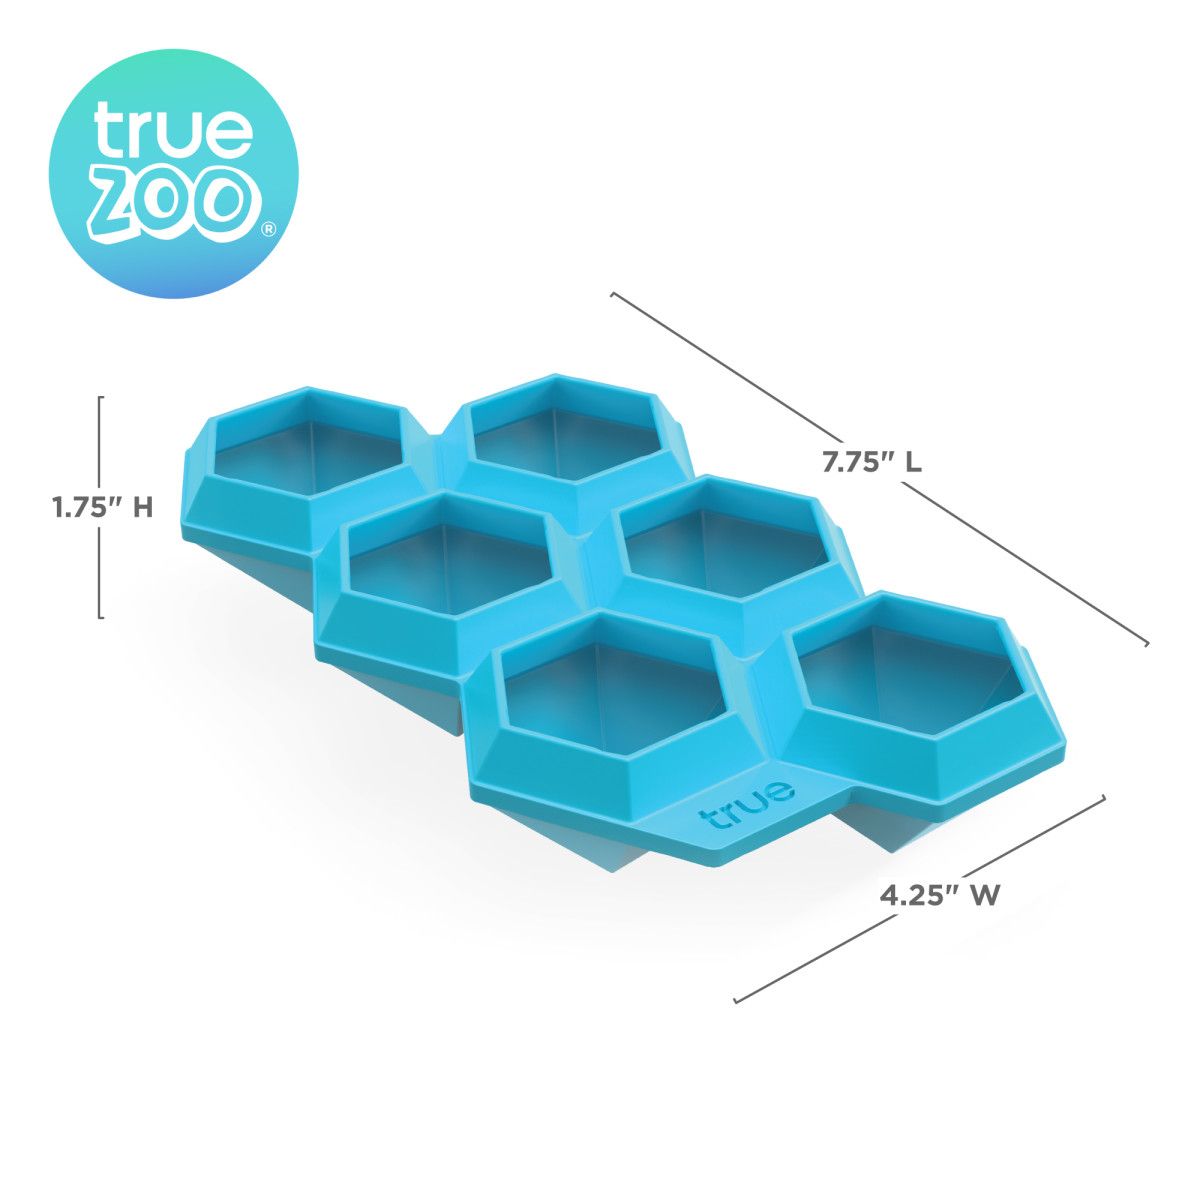 True Zoo® Iced Out™ Diamond Ice Cube Tray at Von Maur